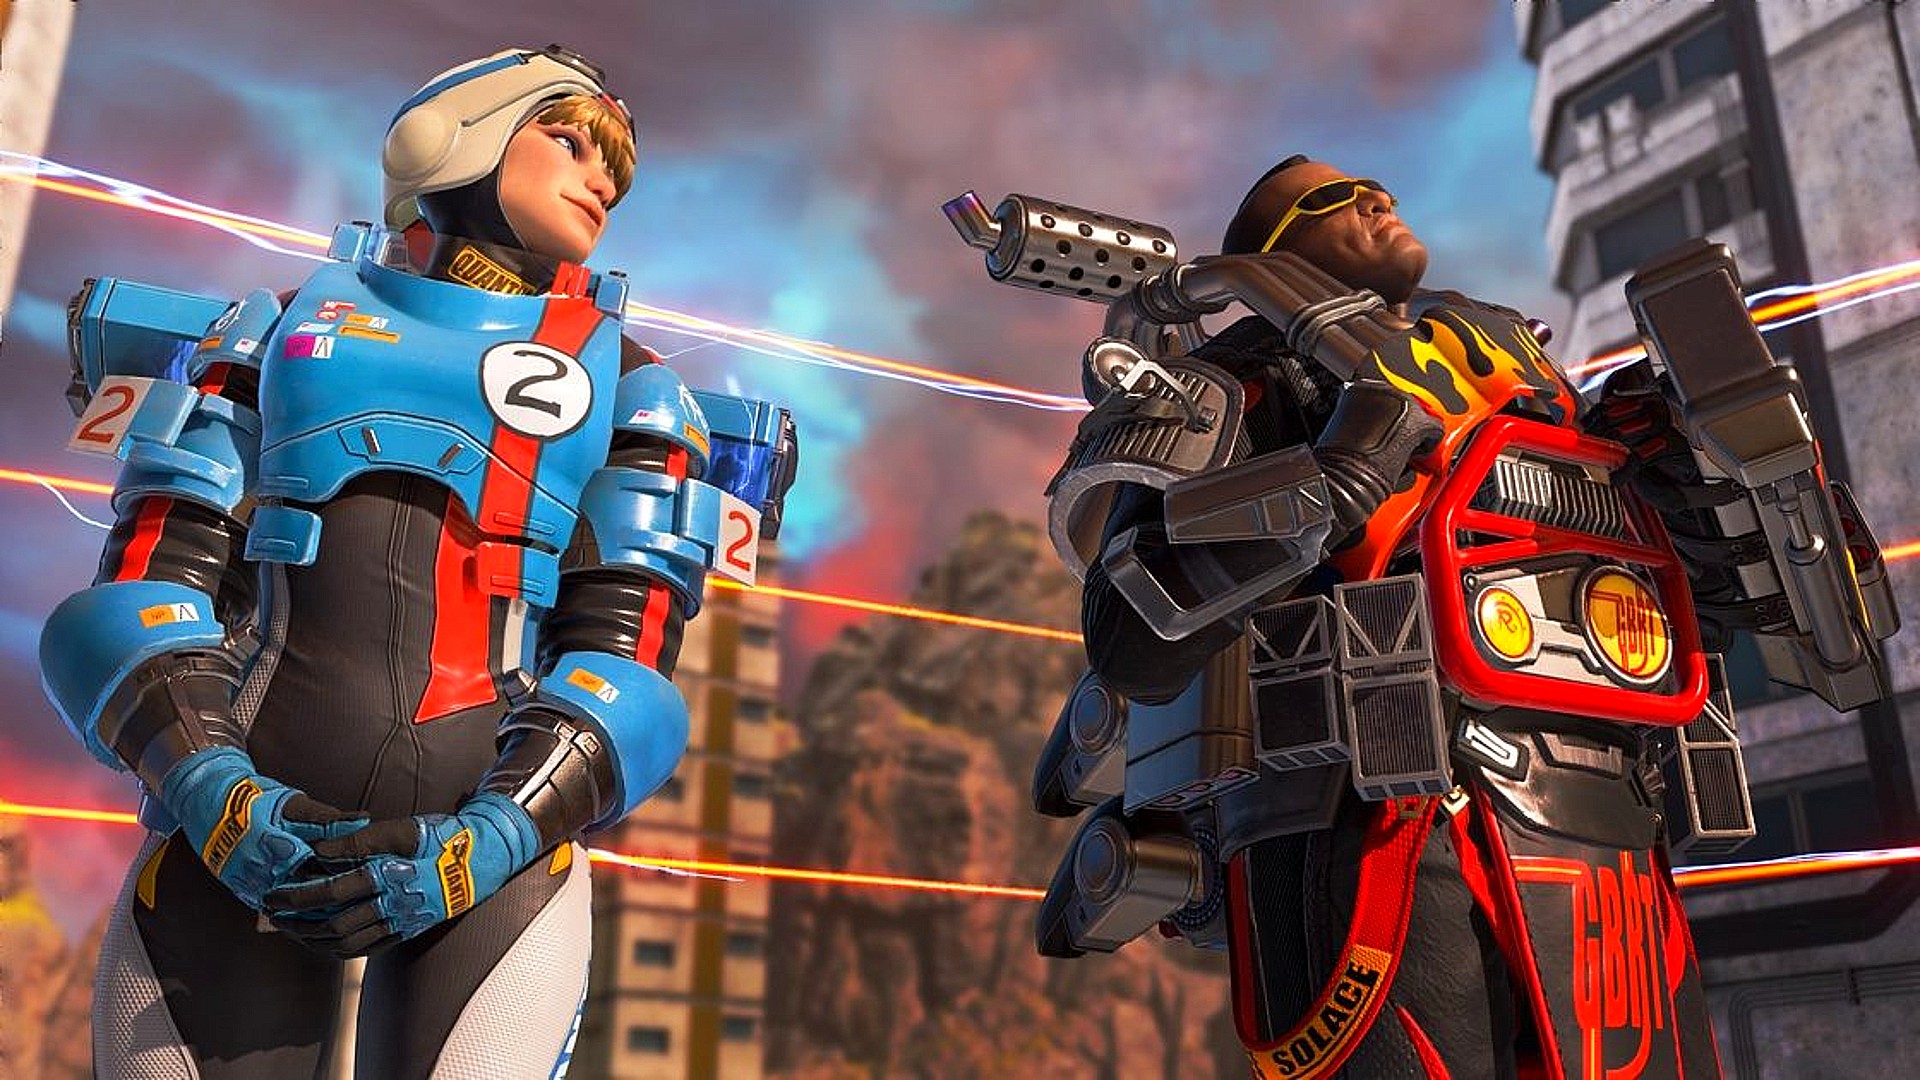 Apex Legends crossplay: how to play with friends across platforms